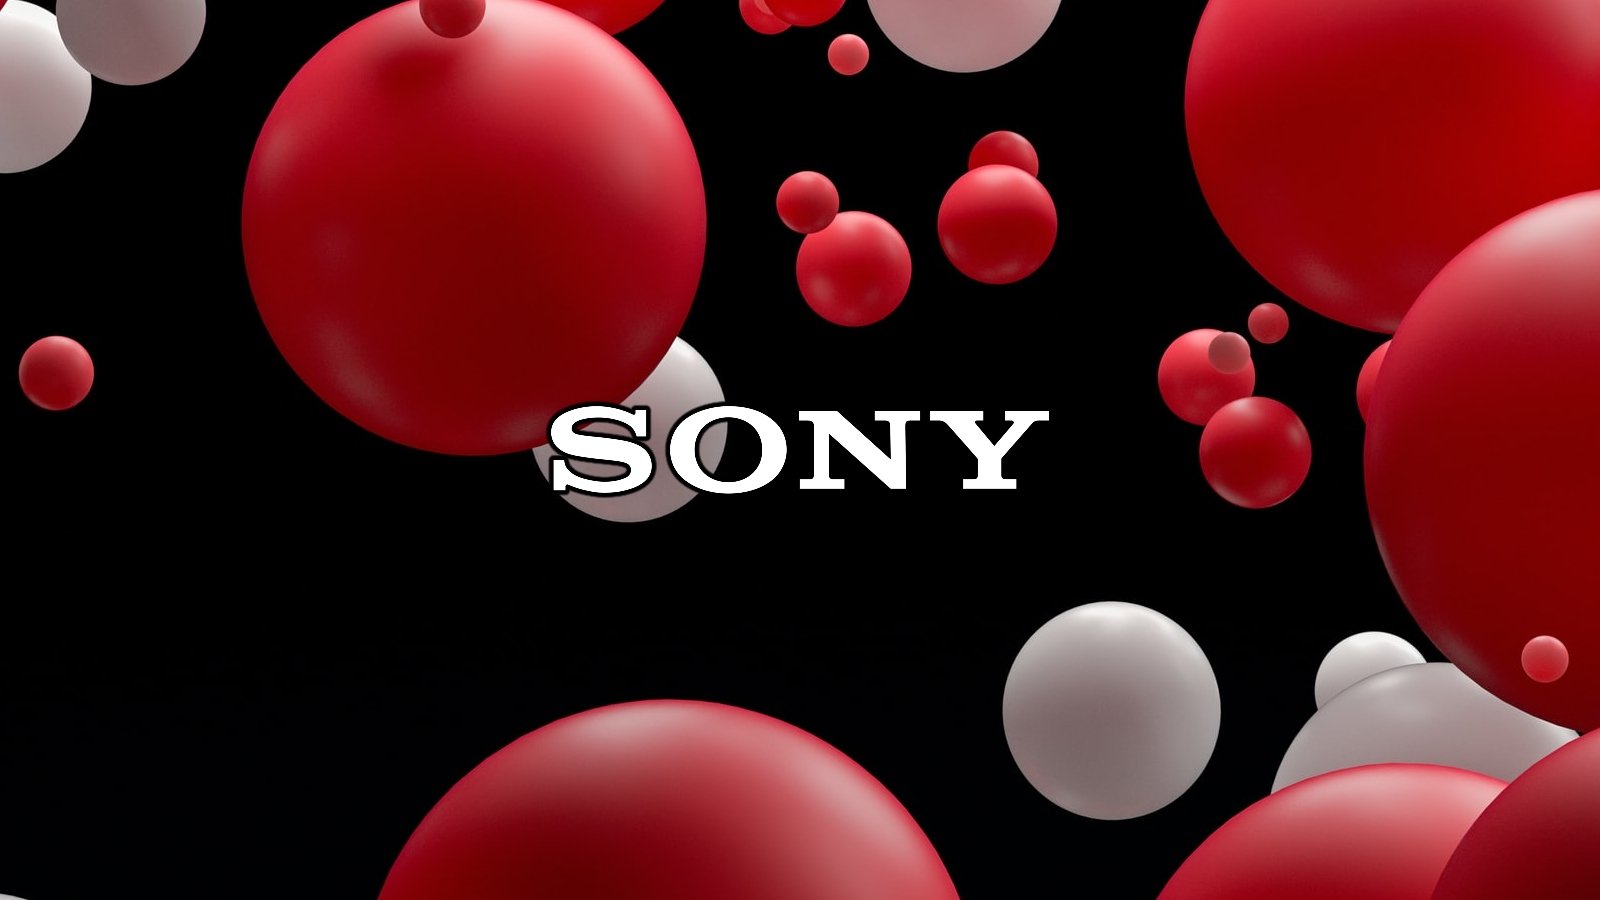 Sony confirms data breach impacting thousands in the U.S. – Source: www.bleepingcomputer.com